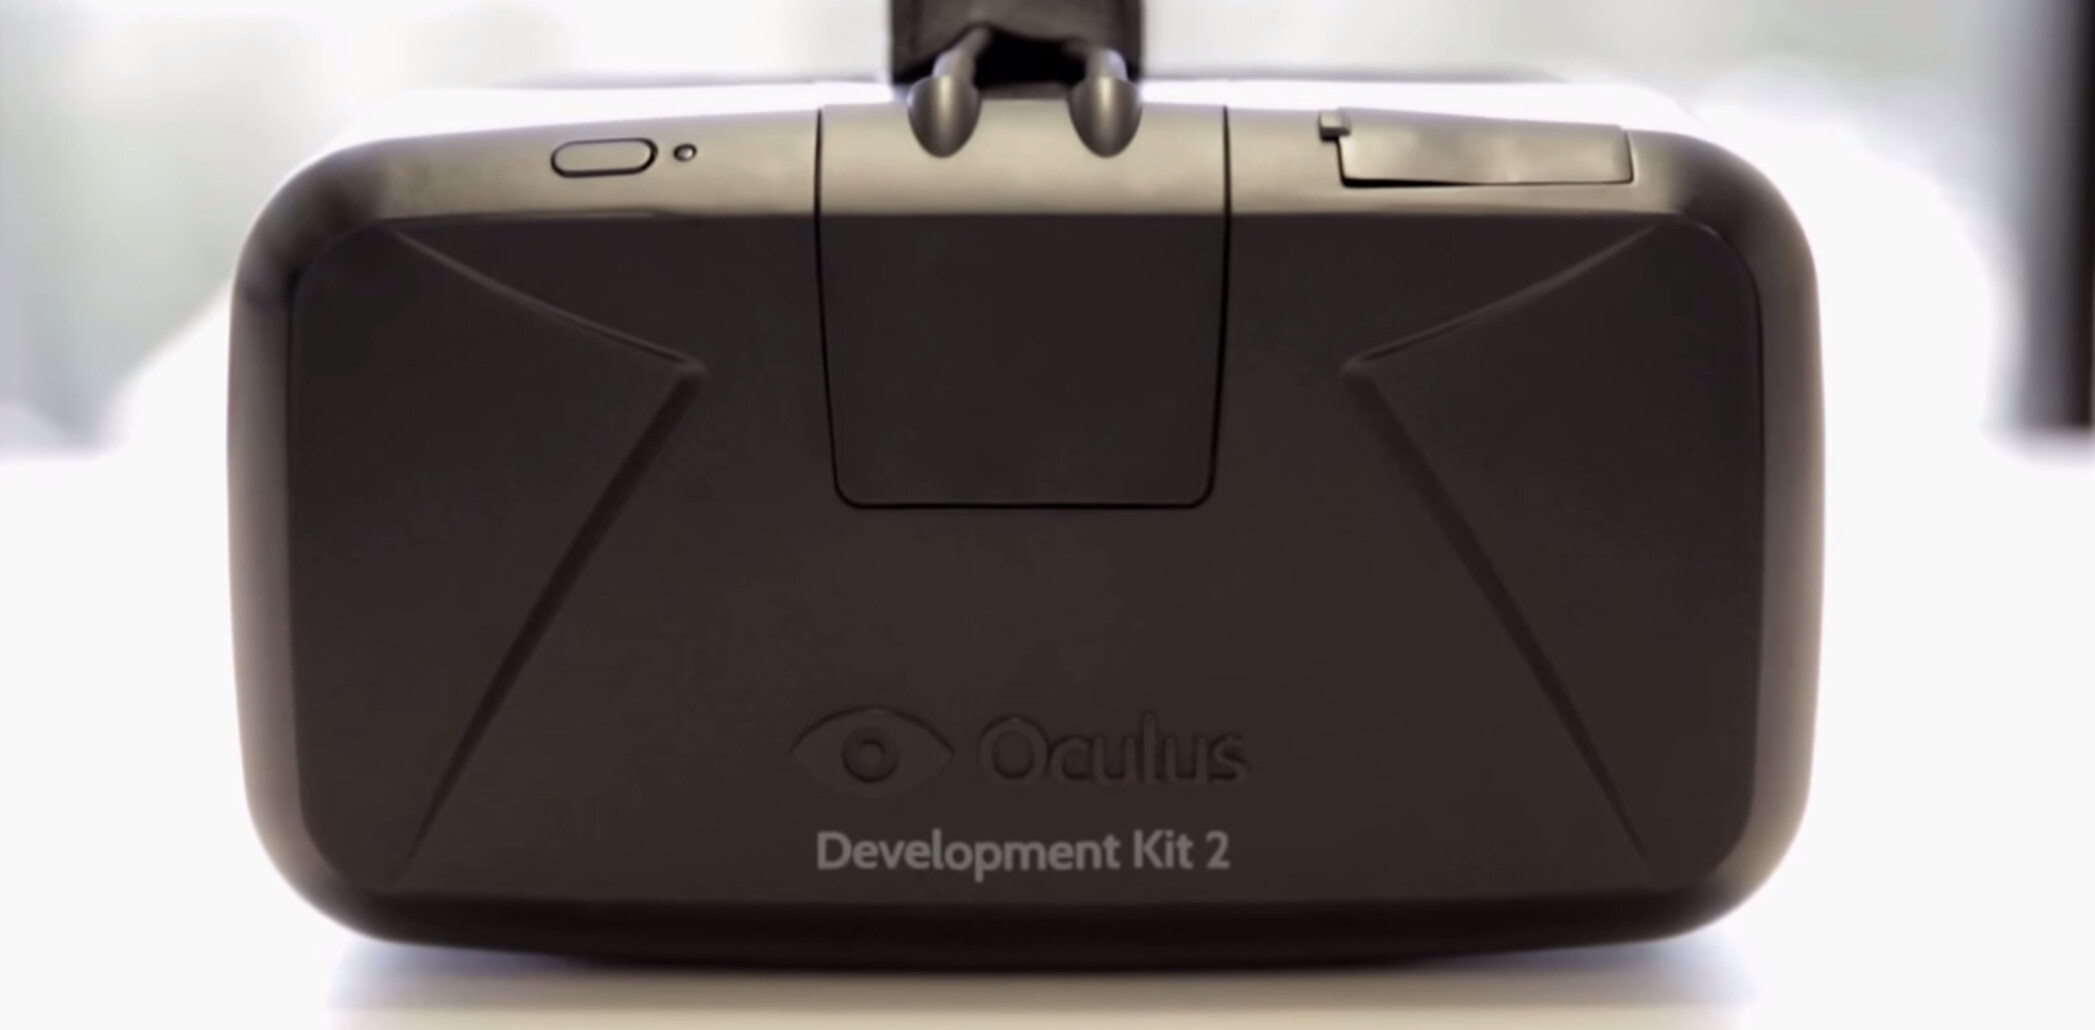 Consumer version of Oculus Rift VR headset ready to arrive in ‘months’, says CEO